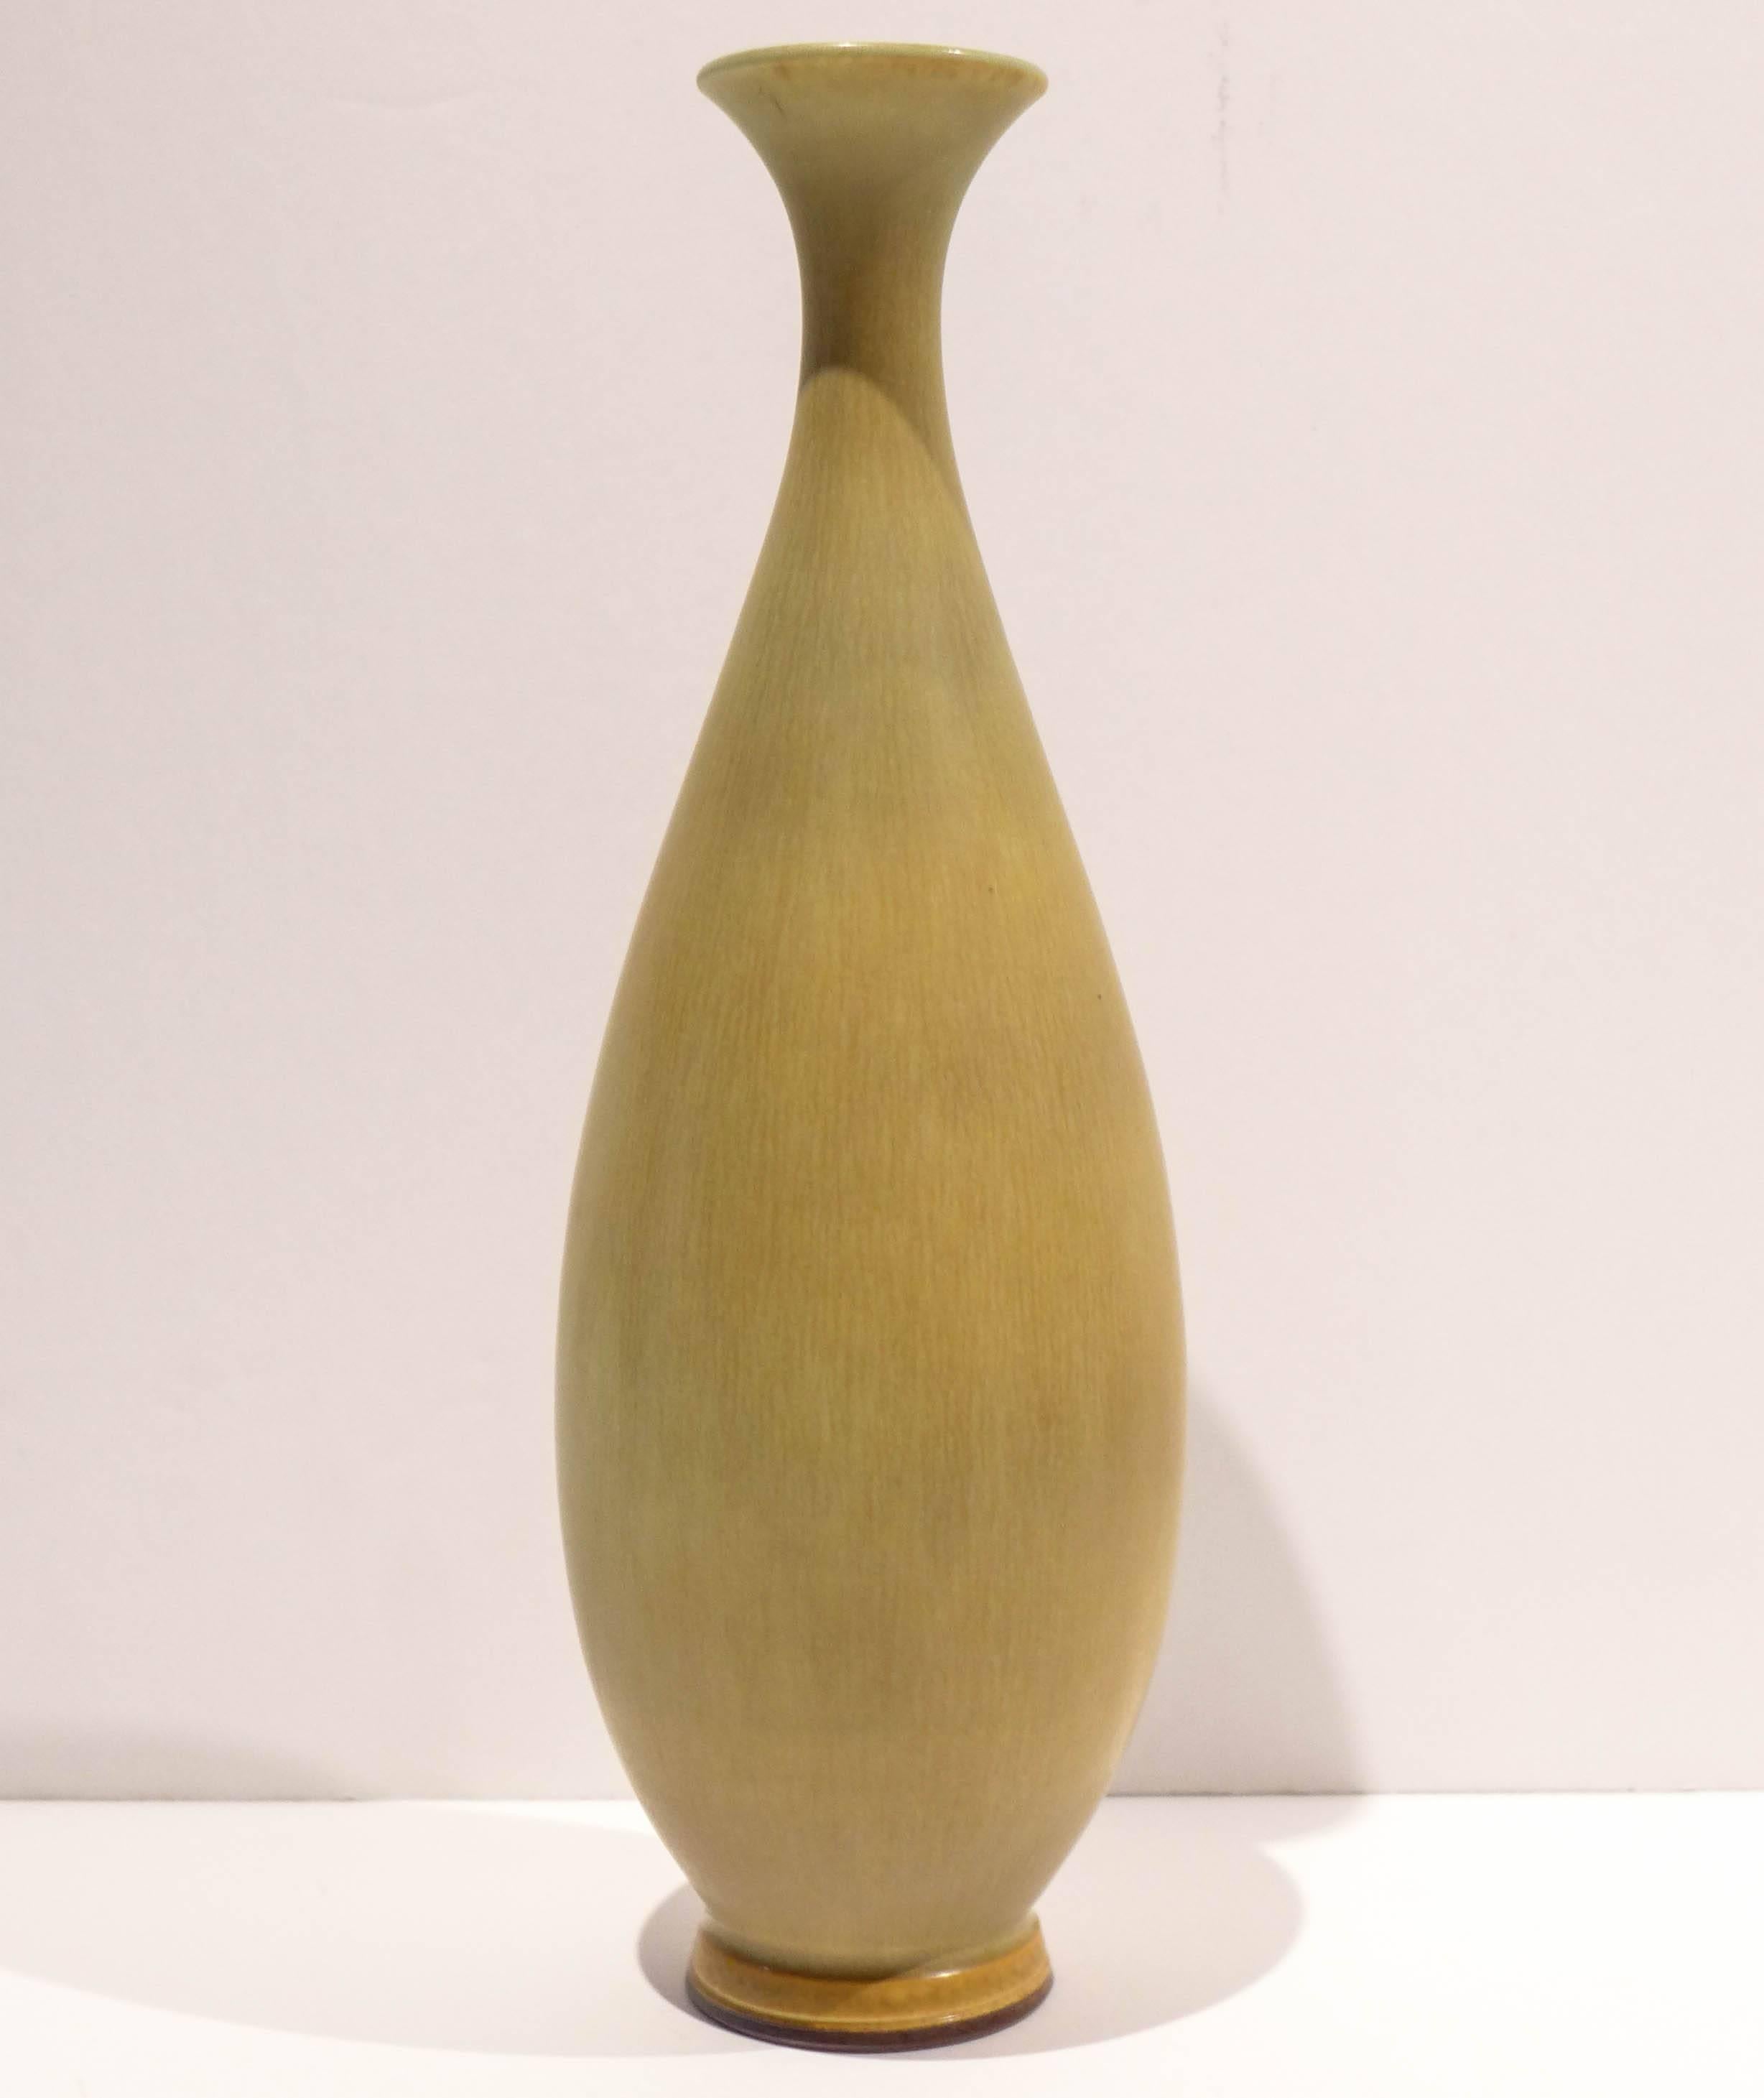 Studio stoneware vase with multi-chromatic matte hares fur glaze in a yellow/ochre color, by eminent Swedish ceramist Berndt Friberg, executed at Gustavsberg, circa 1960s. Incised marks.